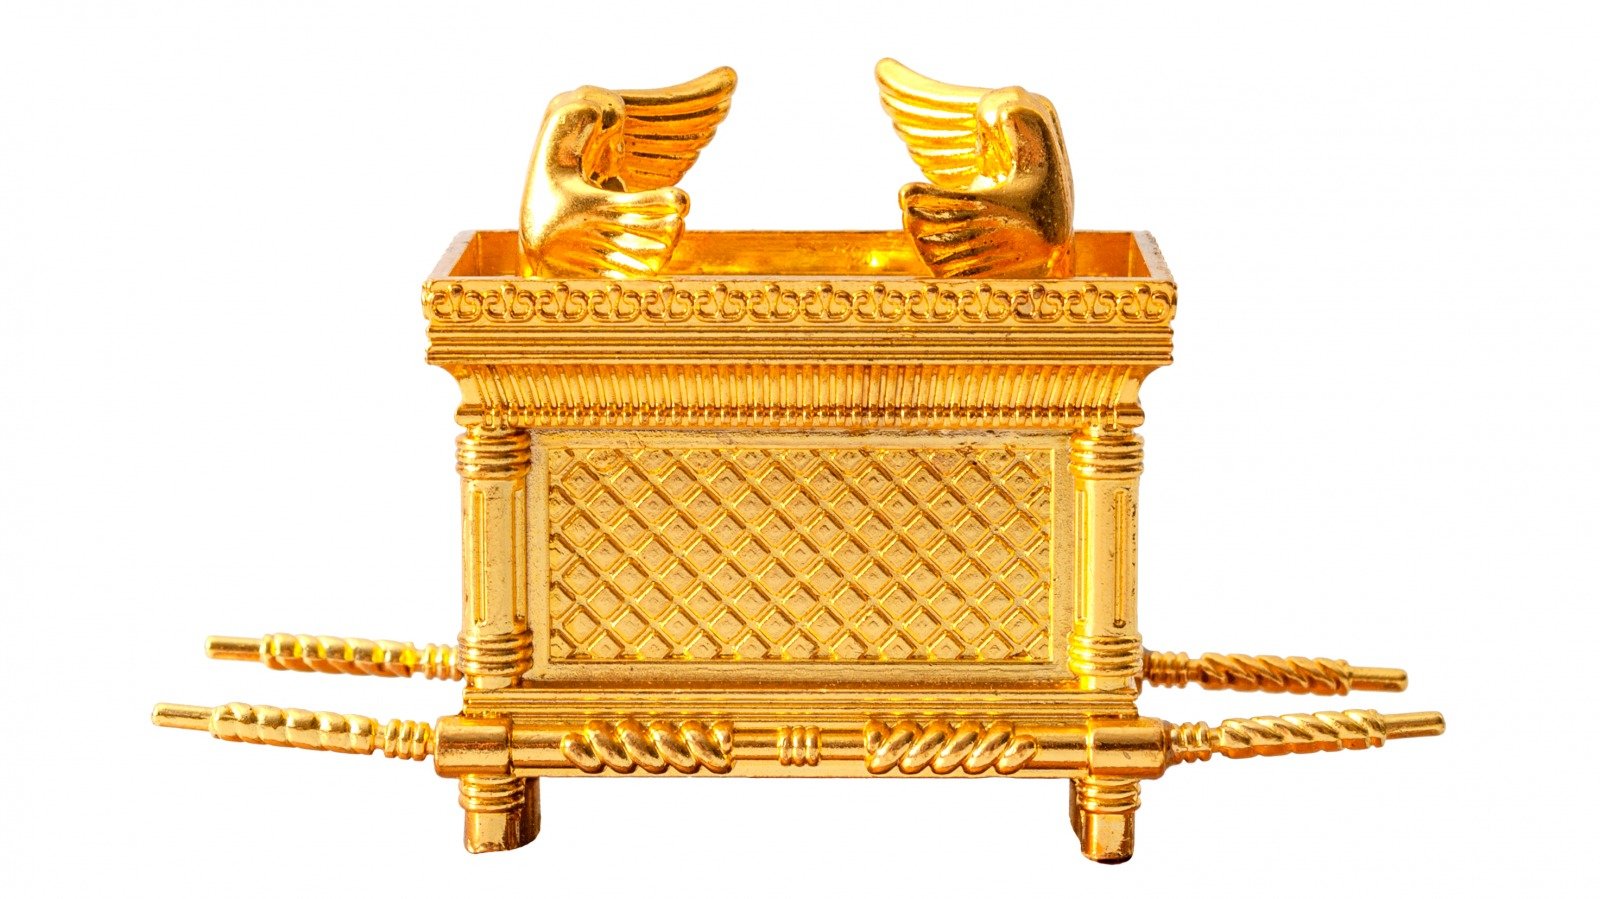 What's Actually In The Ark Of The Covenant? - Grunge